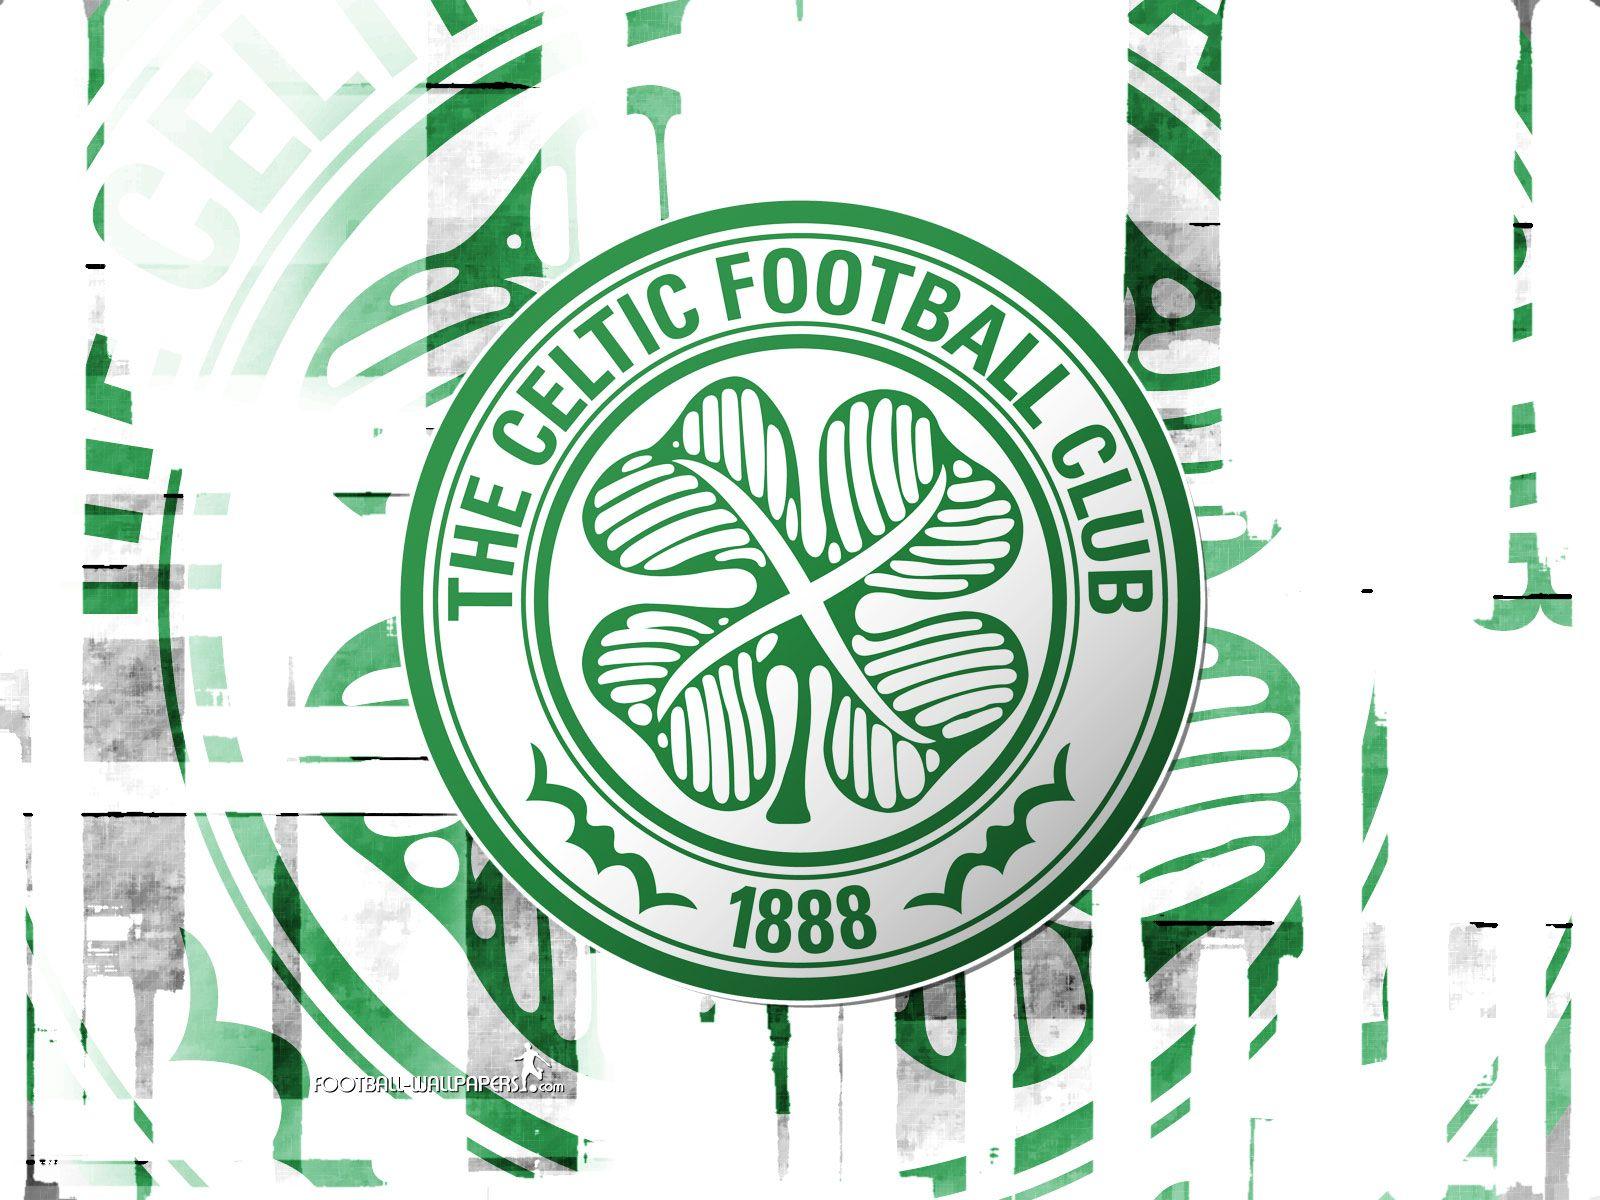 Celtic FC. Welcome to Paradise